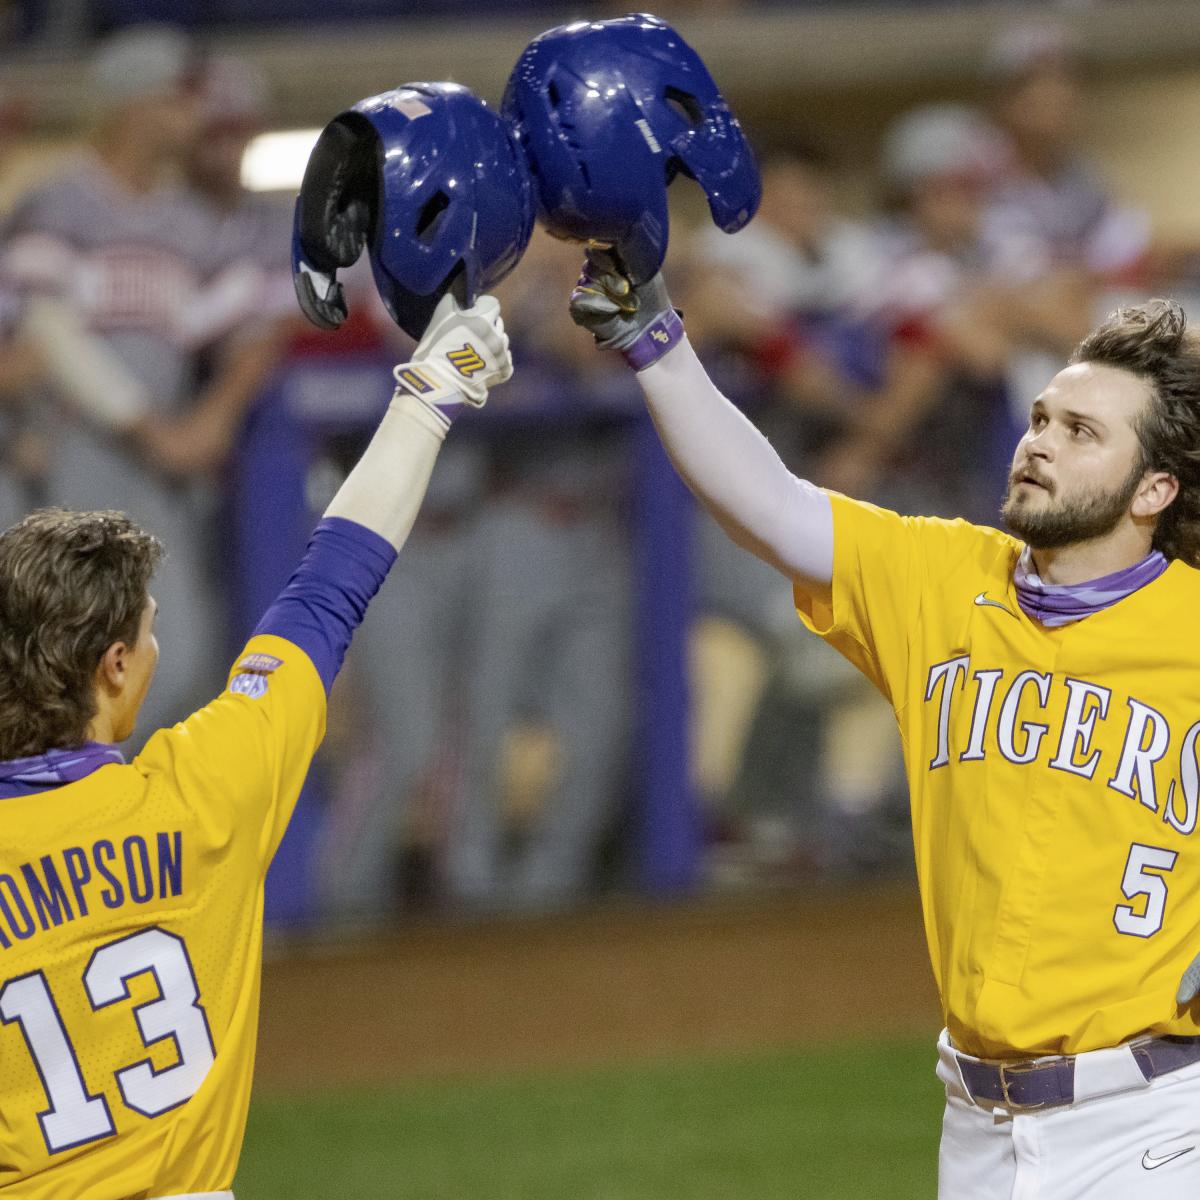 SEC Baseball Tournament 2021: Tuesday Schedule and Bracket Predictions